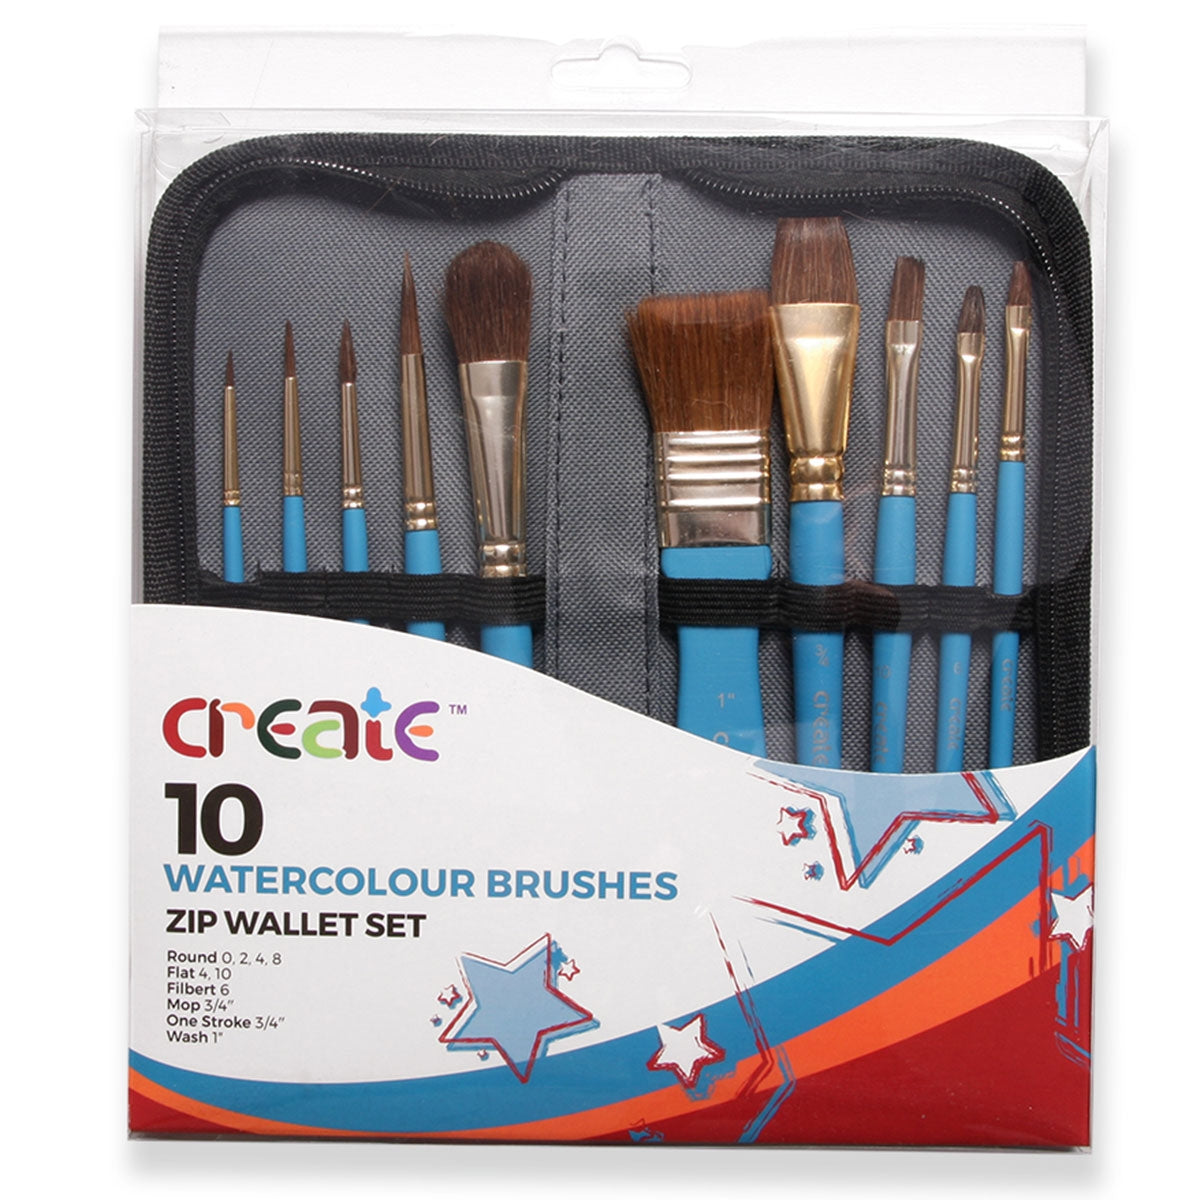 Create - 10 Watercolour Brush Set with Zip Wallet